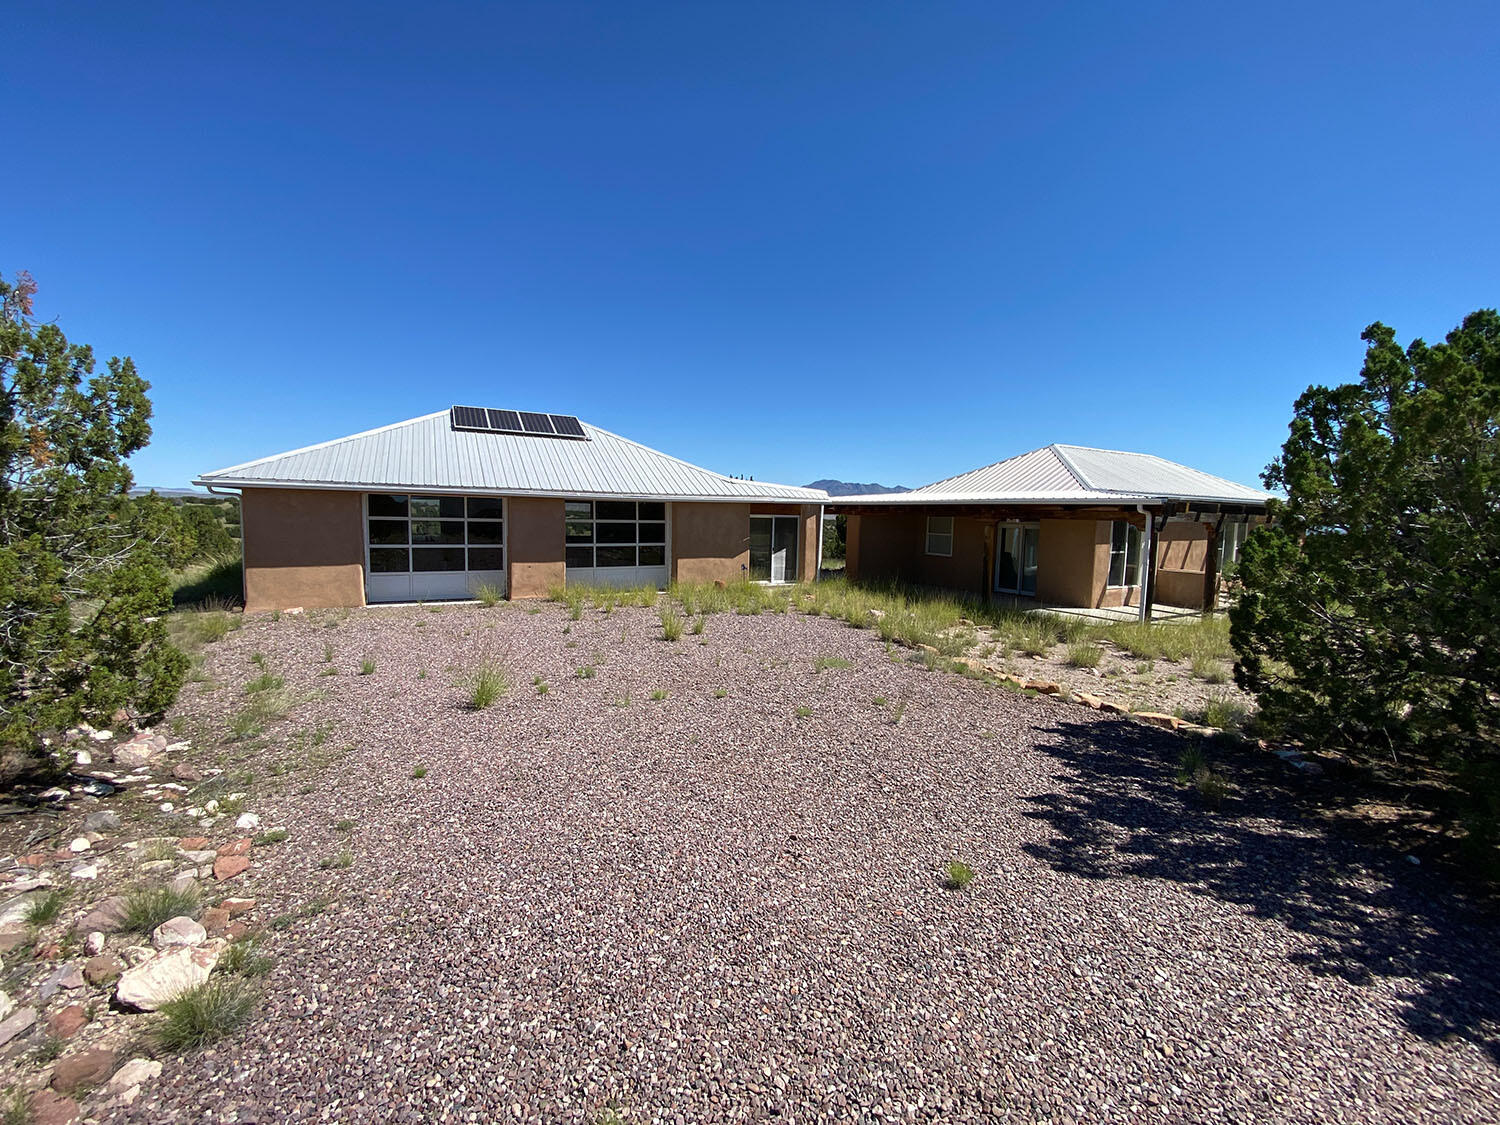 Forest Road 354, Magdalena, NM 87825